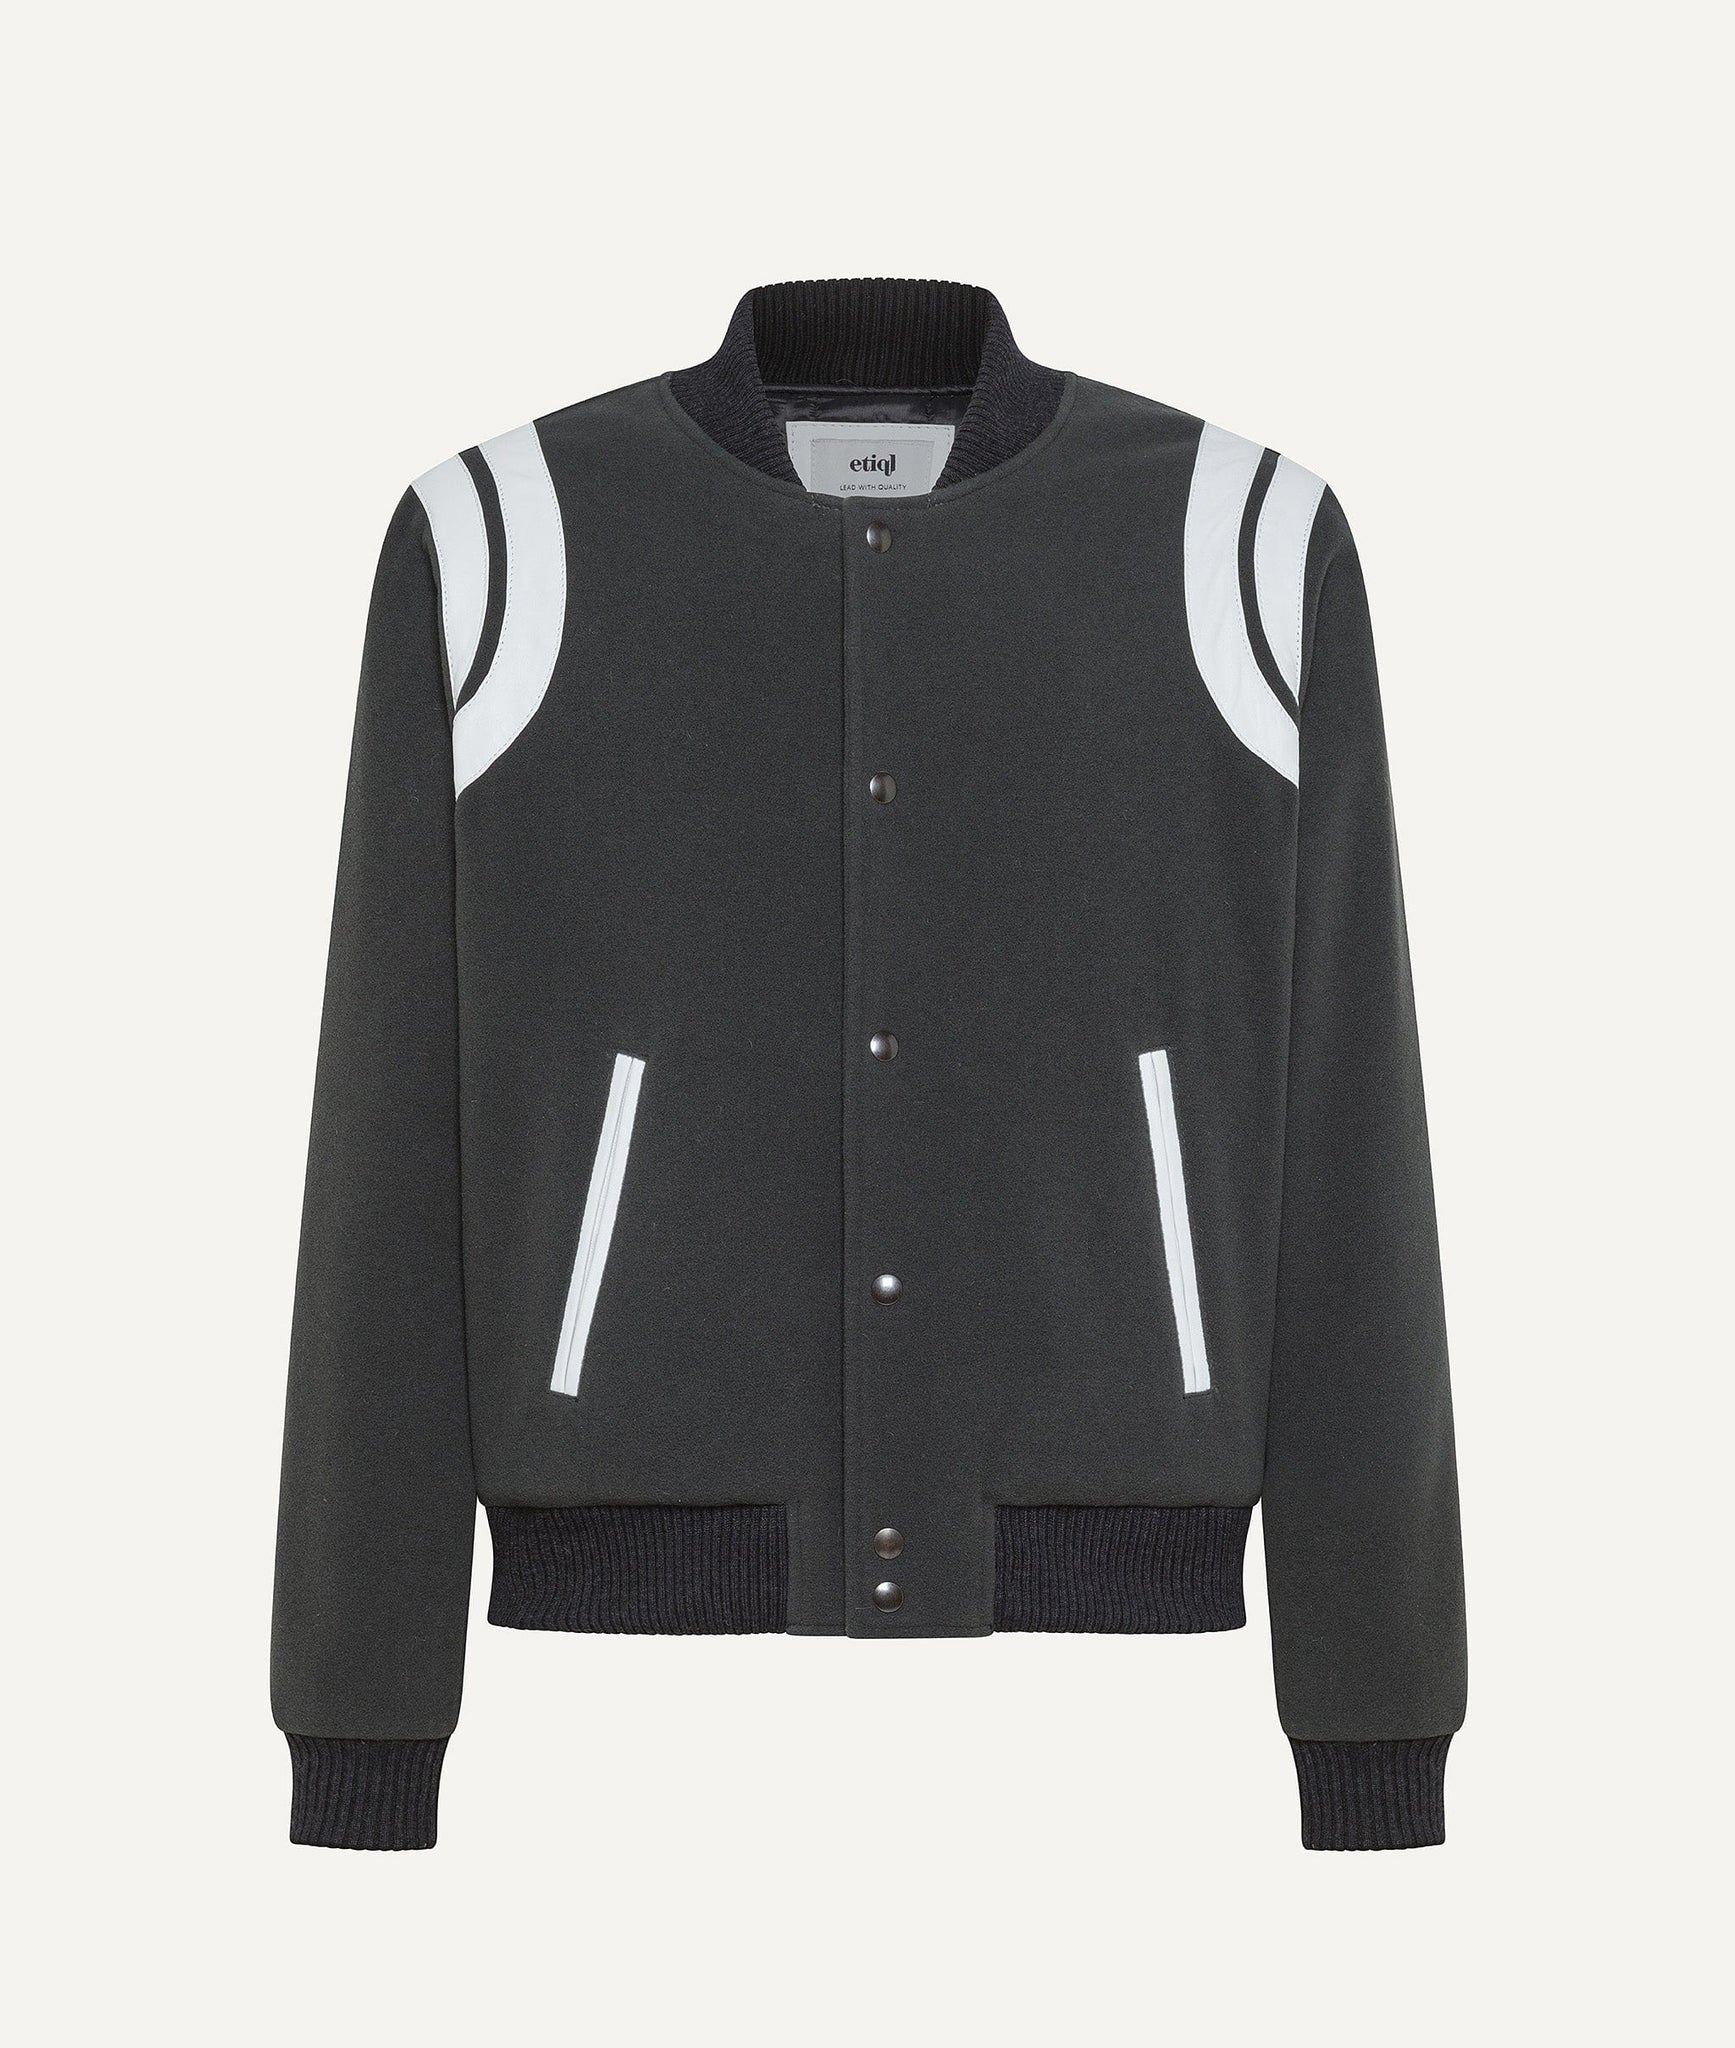 Varsity Jacket in in Wool & Cashmere